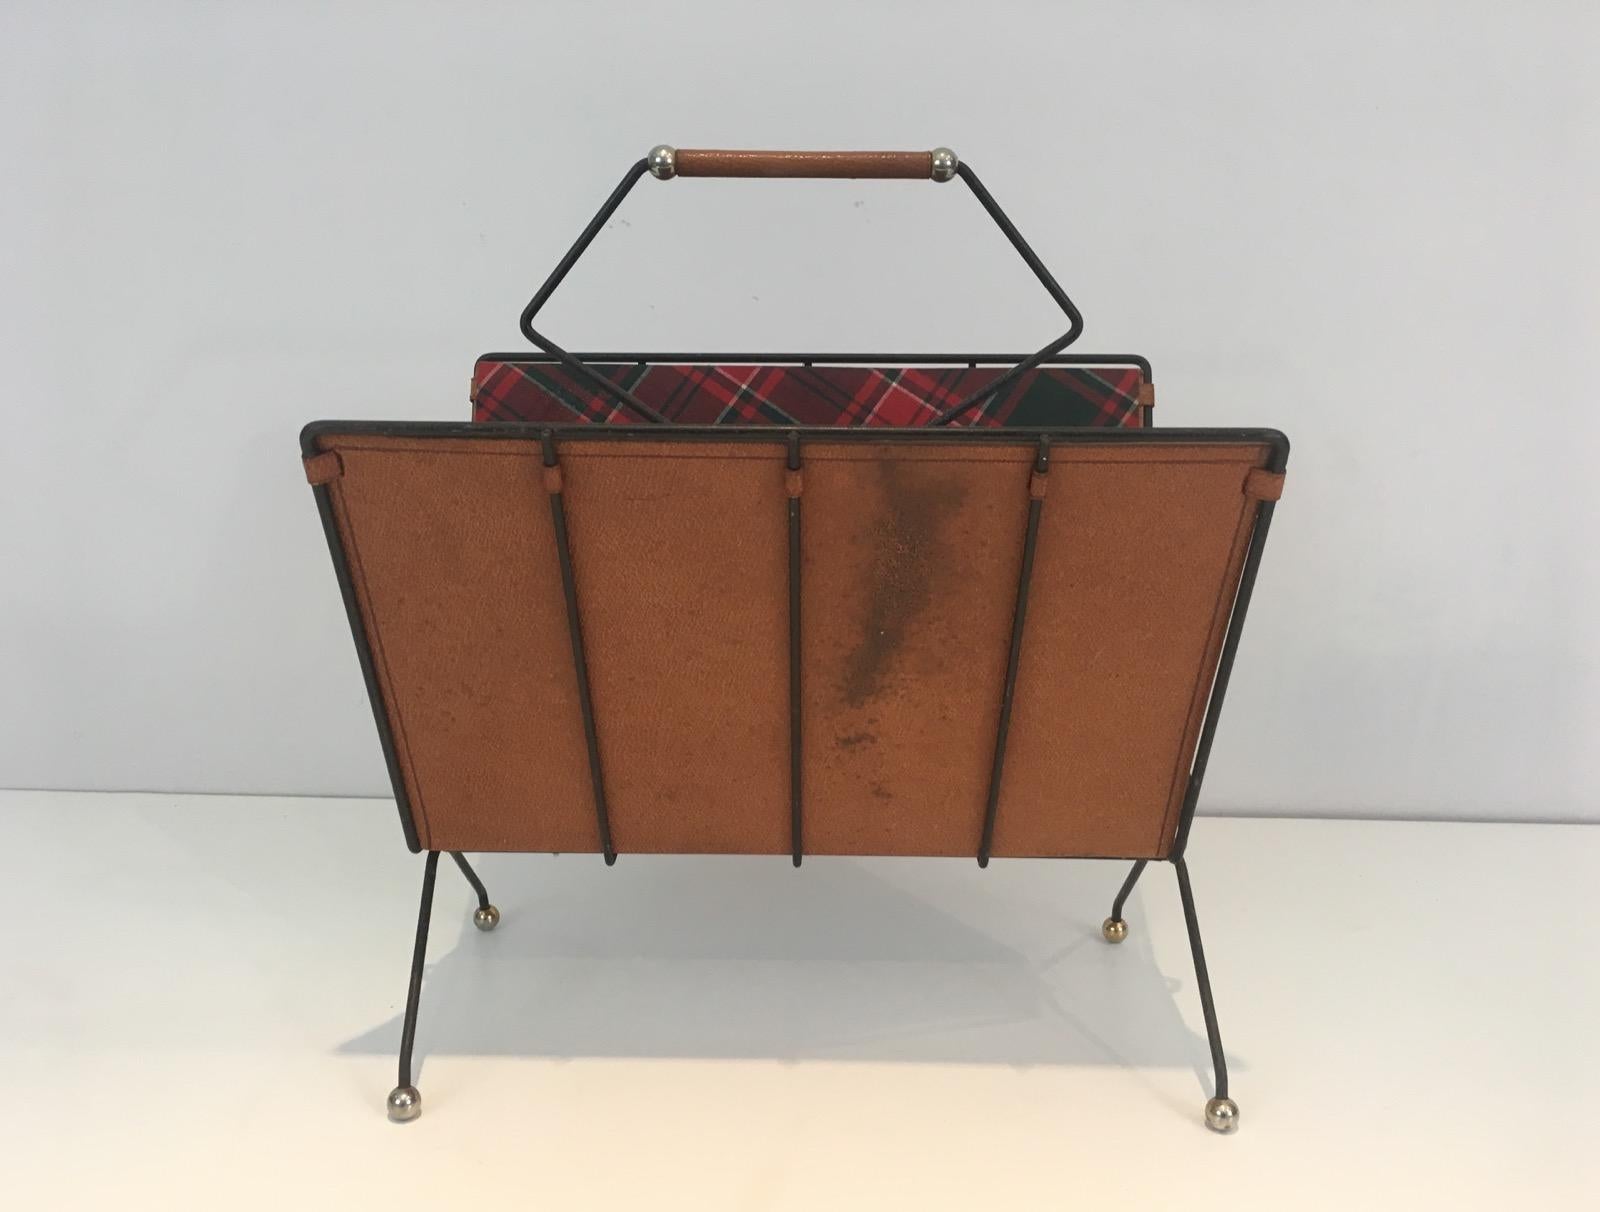 Rare Black Lacquered Metal, Leather and Plaid Fabric Magazine Rack For Sale 2